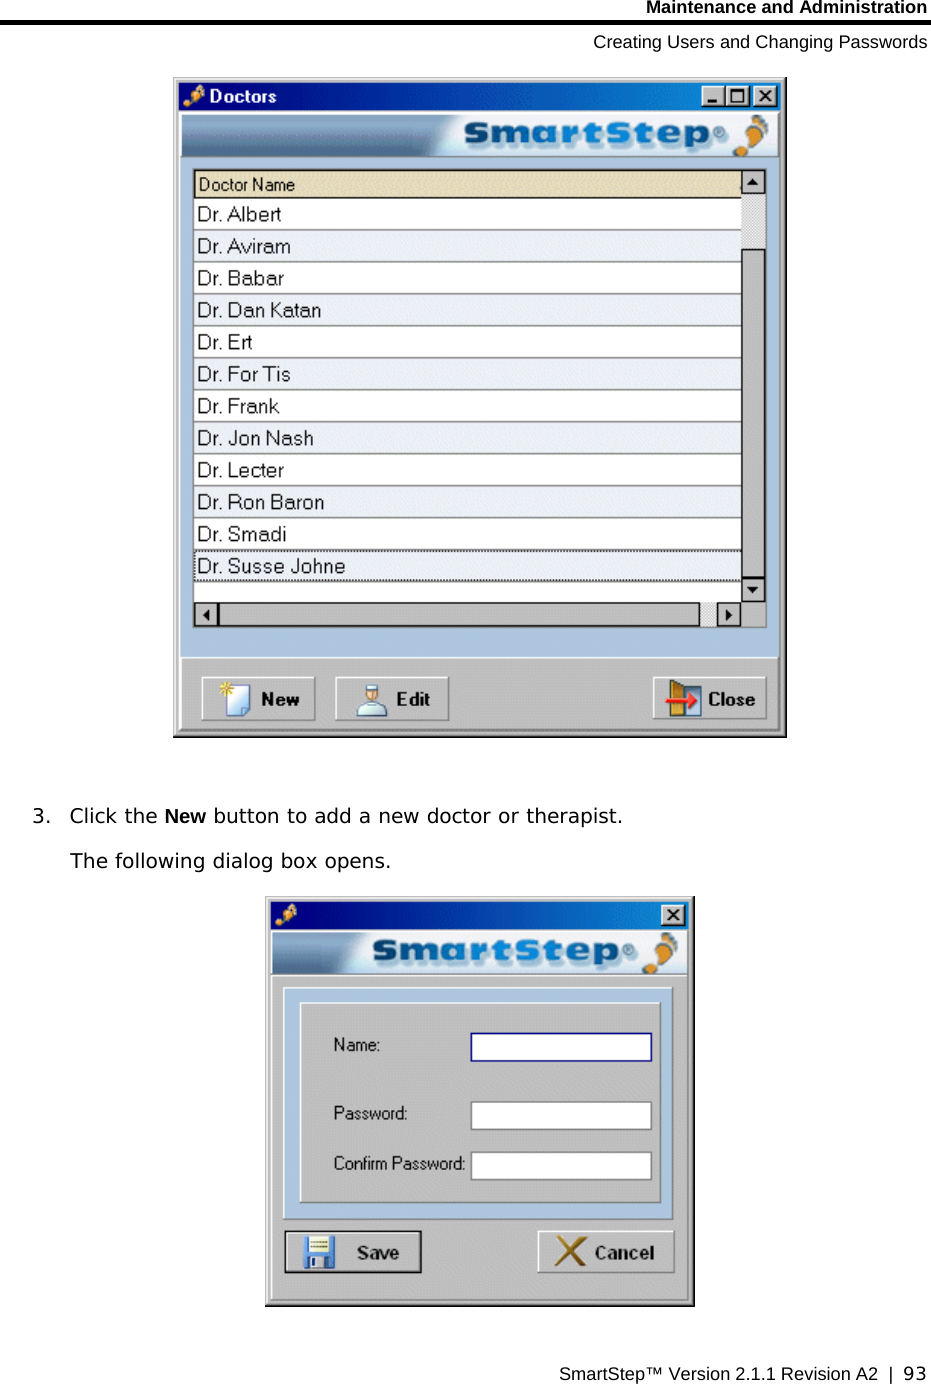 Maintenance and Administration Creating Users and Changing Passwords SmartStep™ Version 2.1.1 Revision A2  |  93    3. Click the New button to add a new doctor or therapist.    The following dialog box opens.   